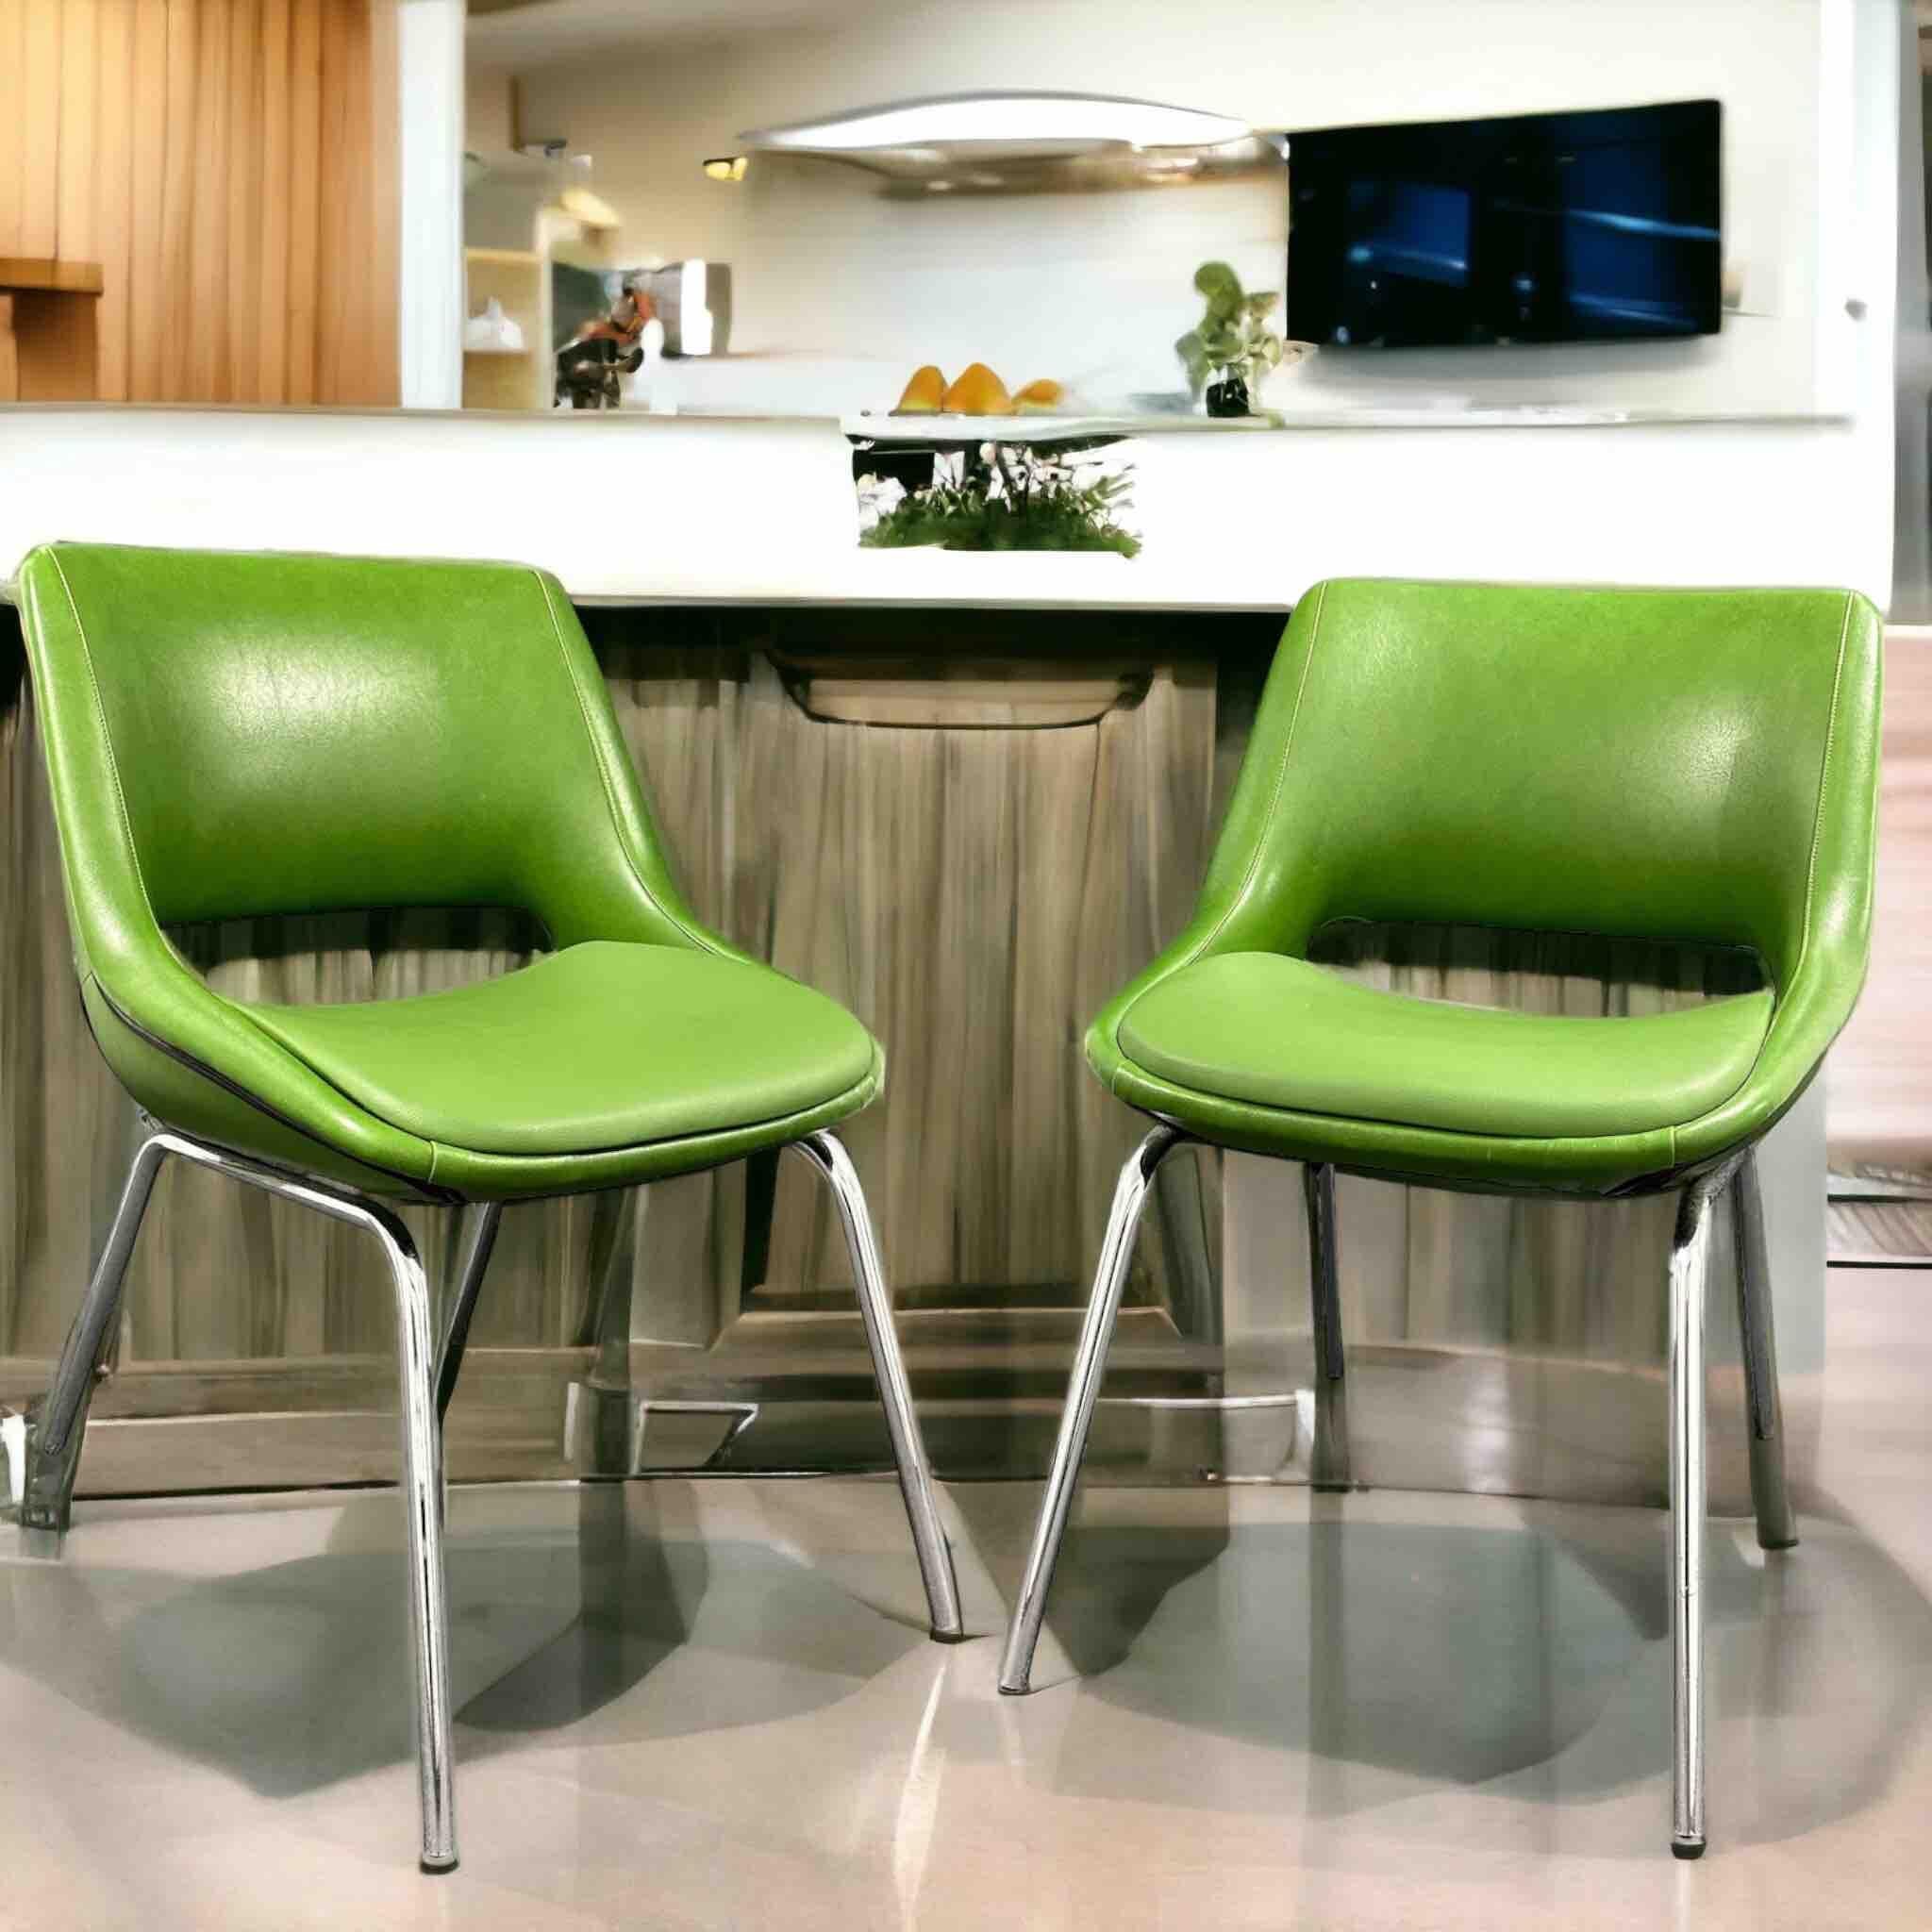 Offered is a set of two gorgeous lounge chairs. Once used in the seating areas of homes, these chrome steel frame chairs were manufactured by manufacturer Blaha Sitzmobel in Austria. There is a corresponding label under the seat of the chairs. The